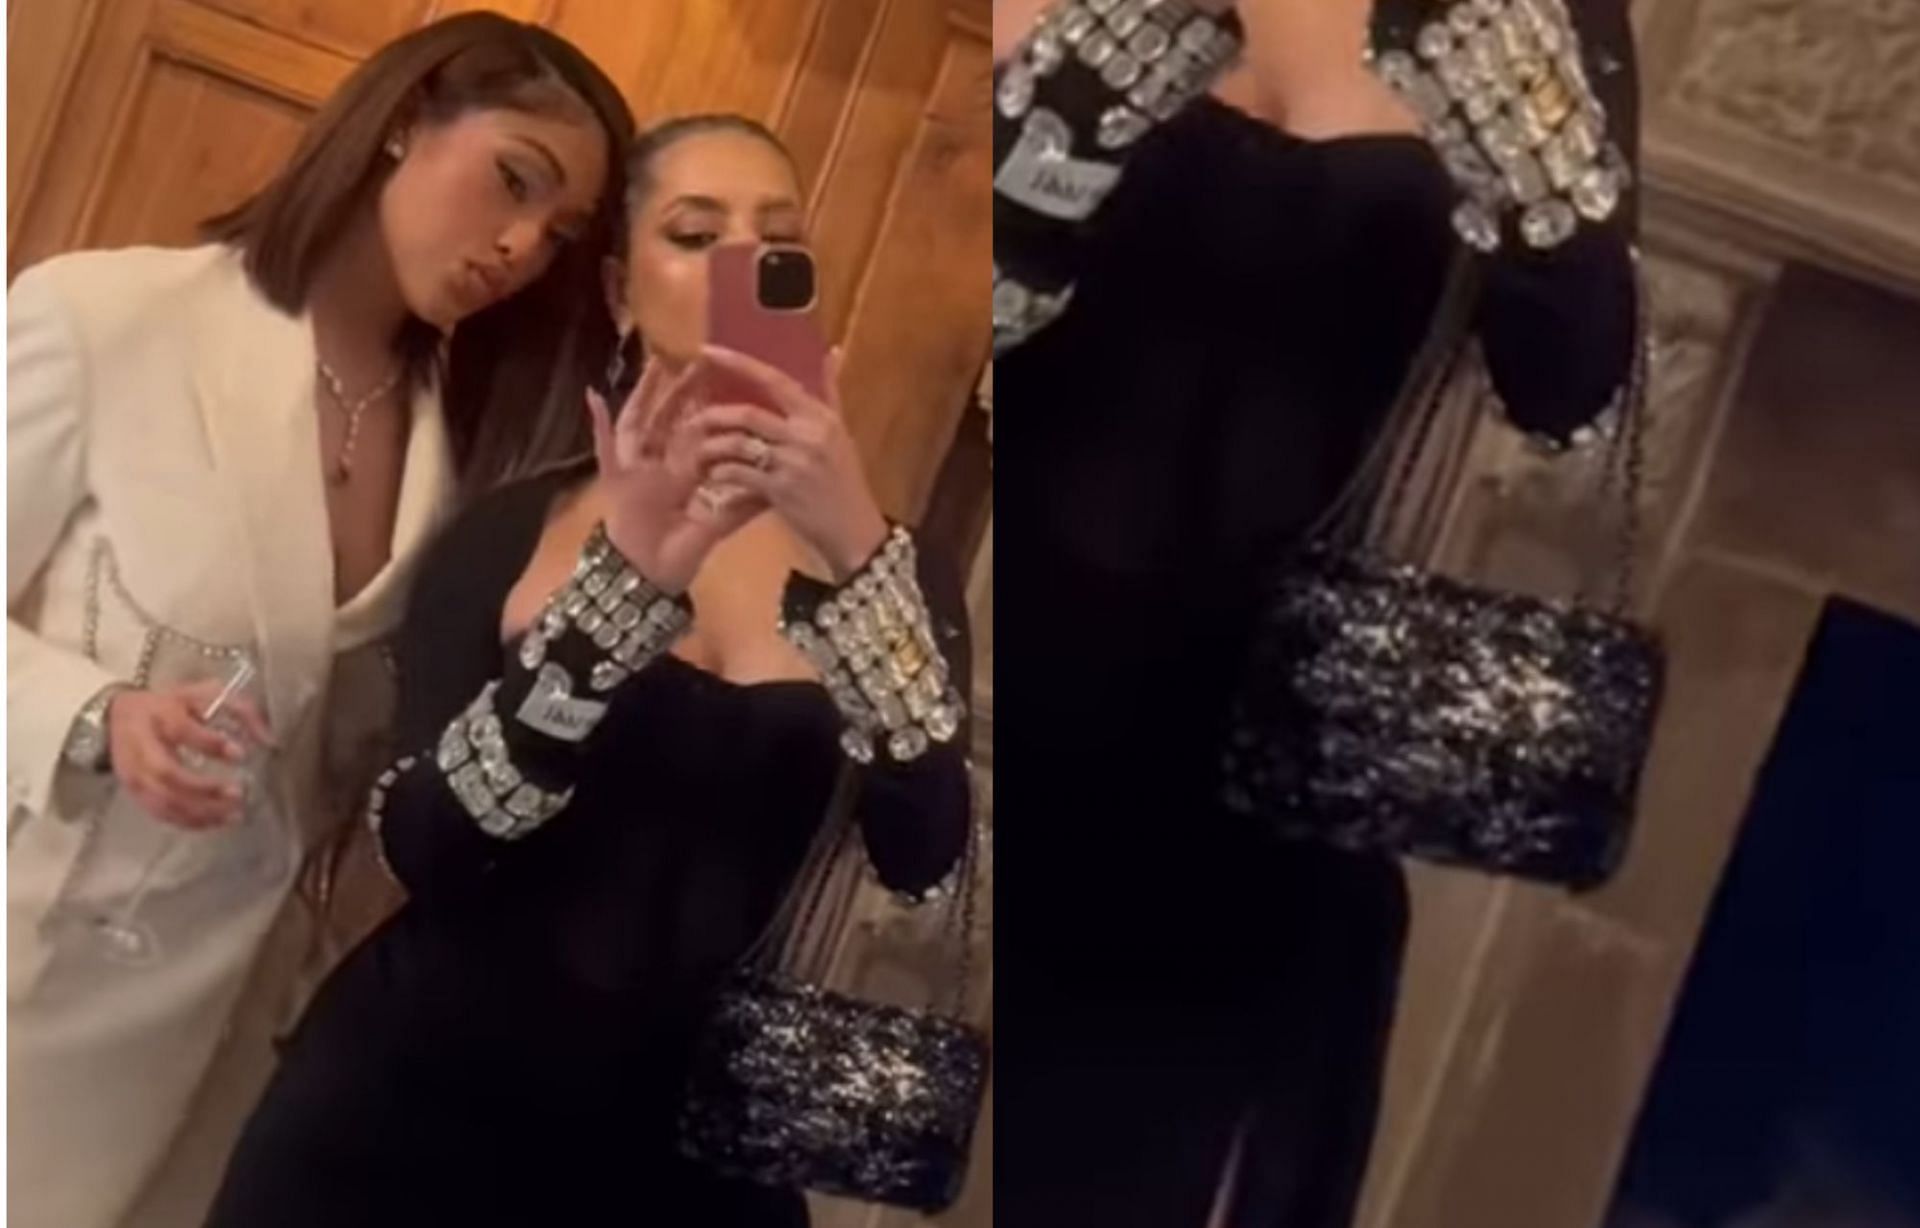 LOOK: Mandana Bolourchi poses with Jordyn Woods flaunting her $7000 Chanel bag